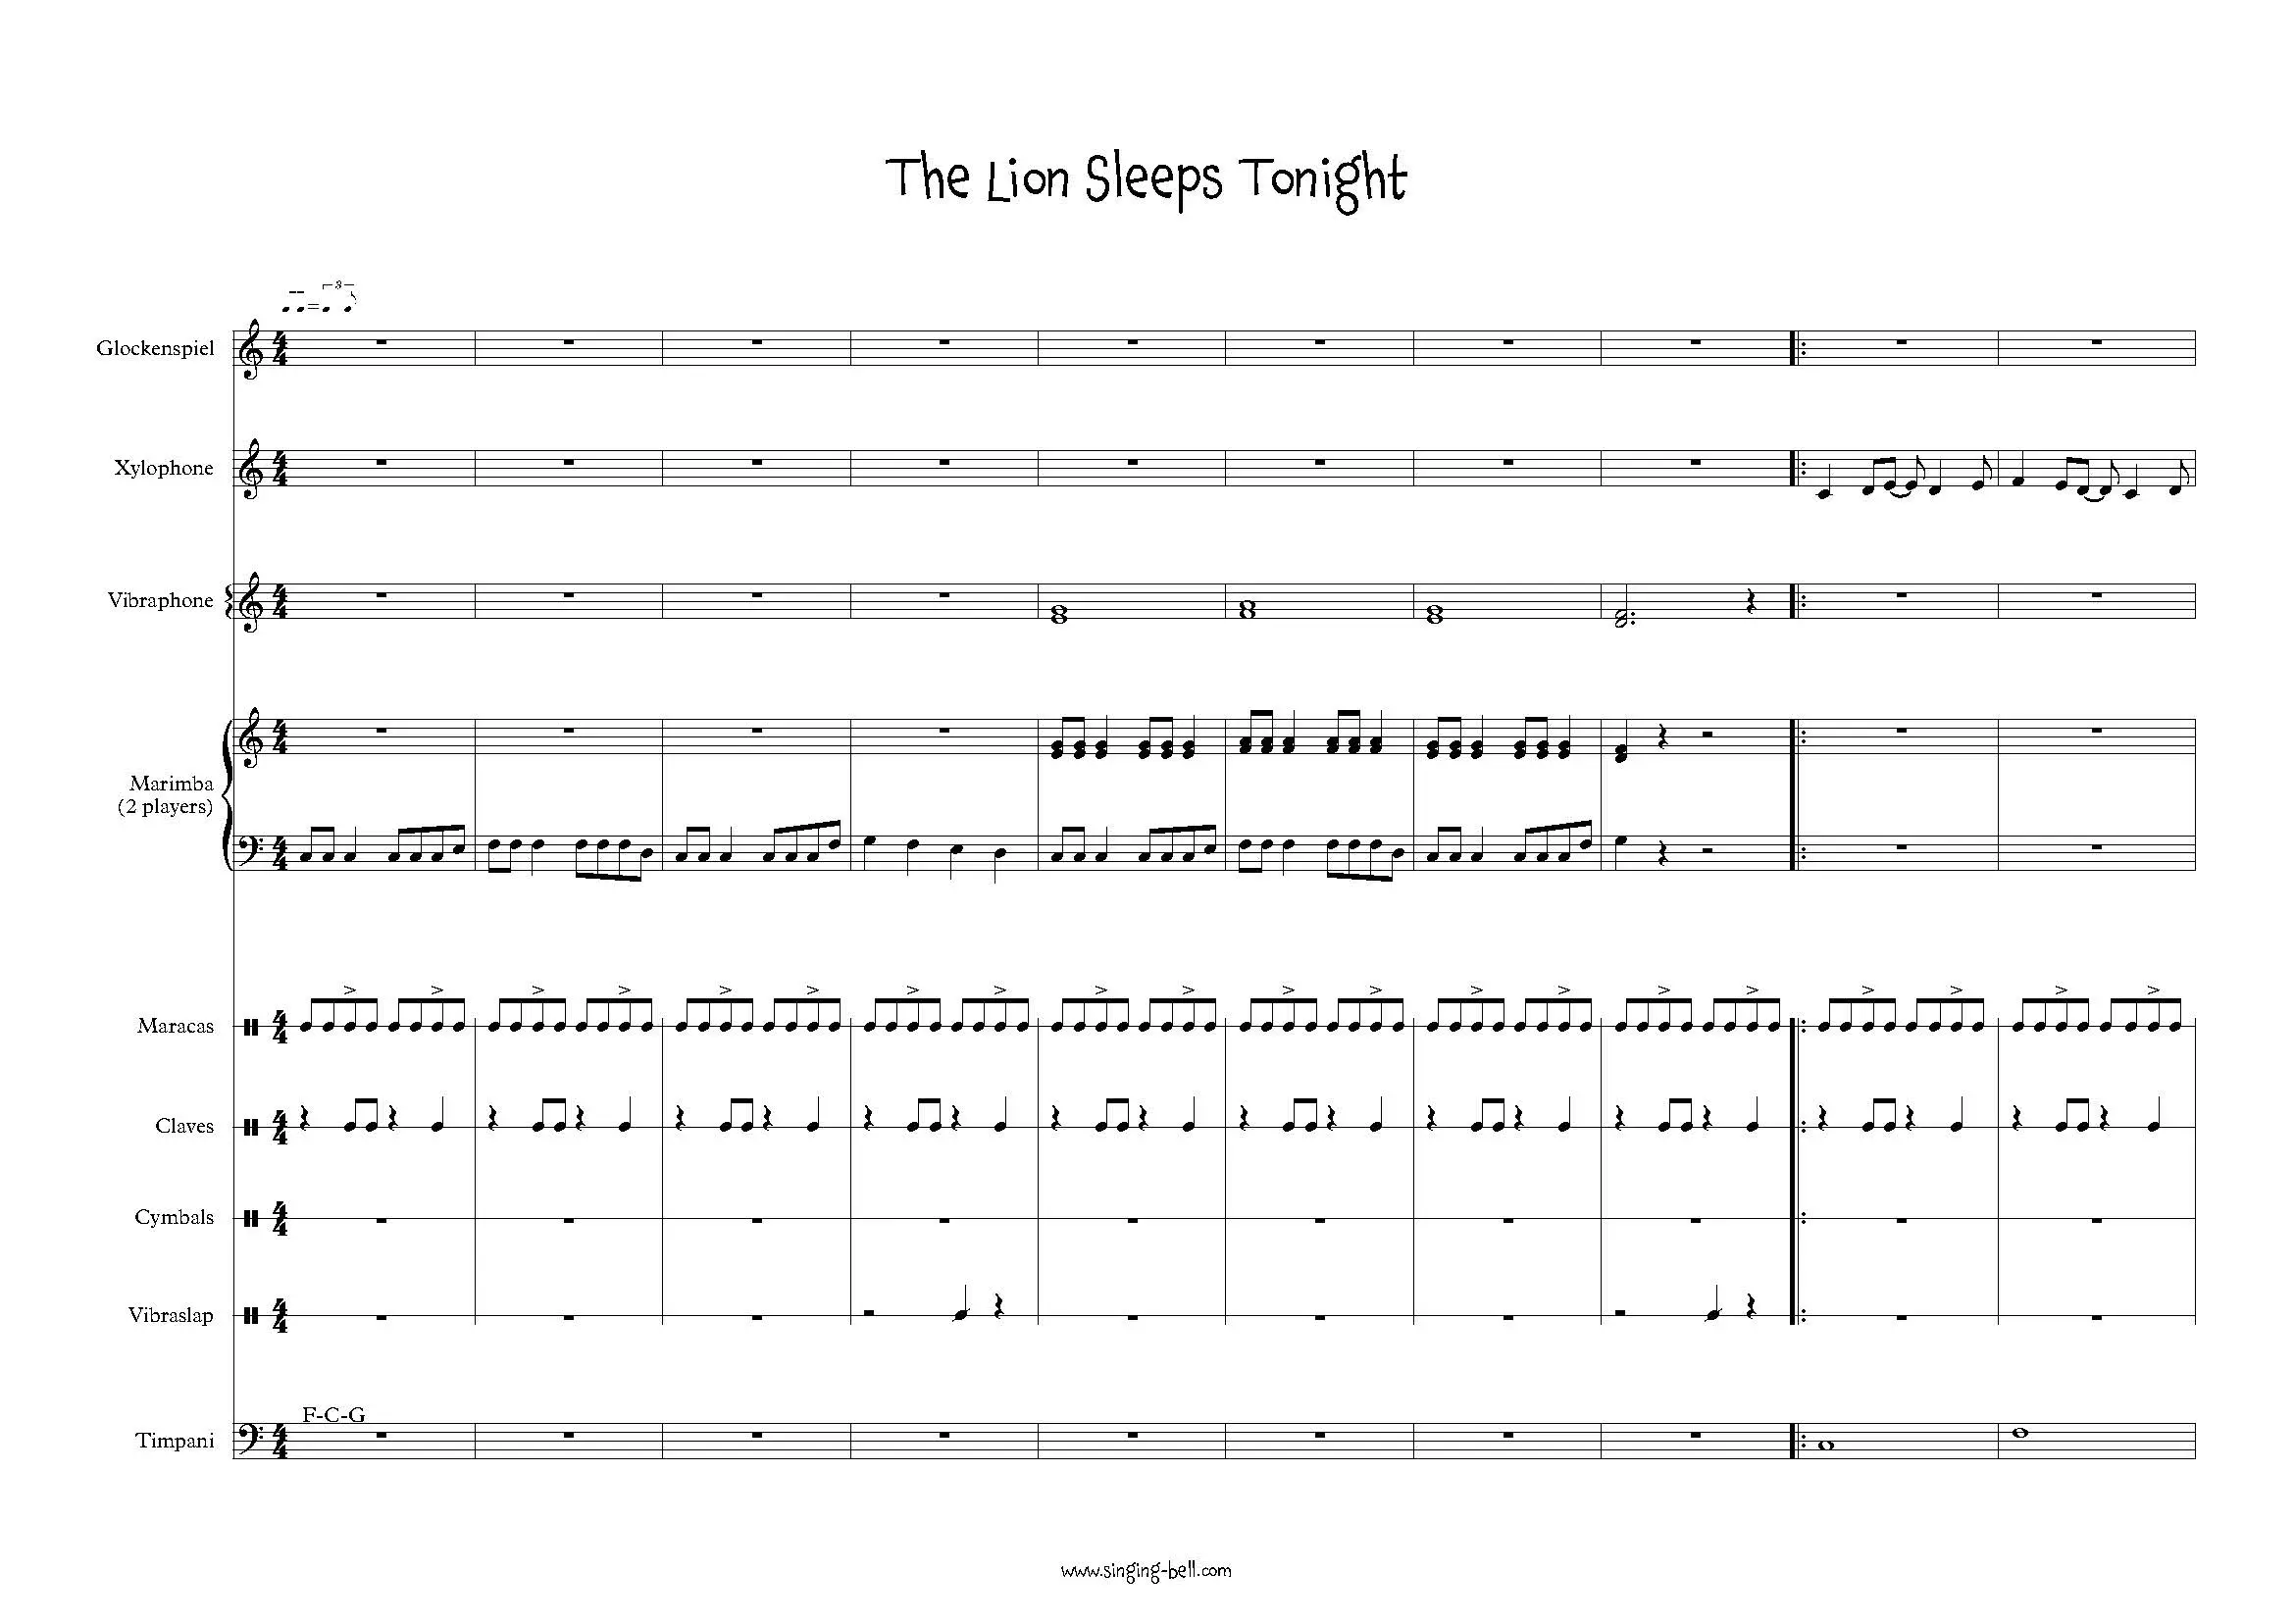 The_Lion_Sleeps_Tonight-percussion-sheet-music singing-bell_Page_1